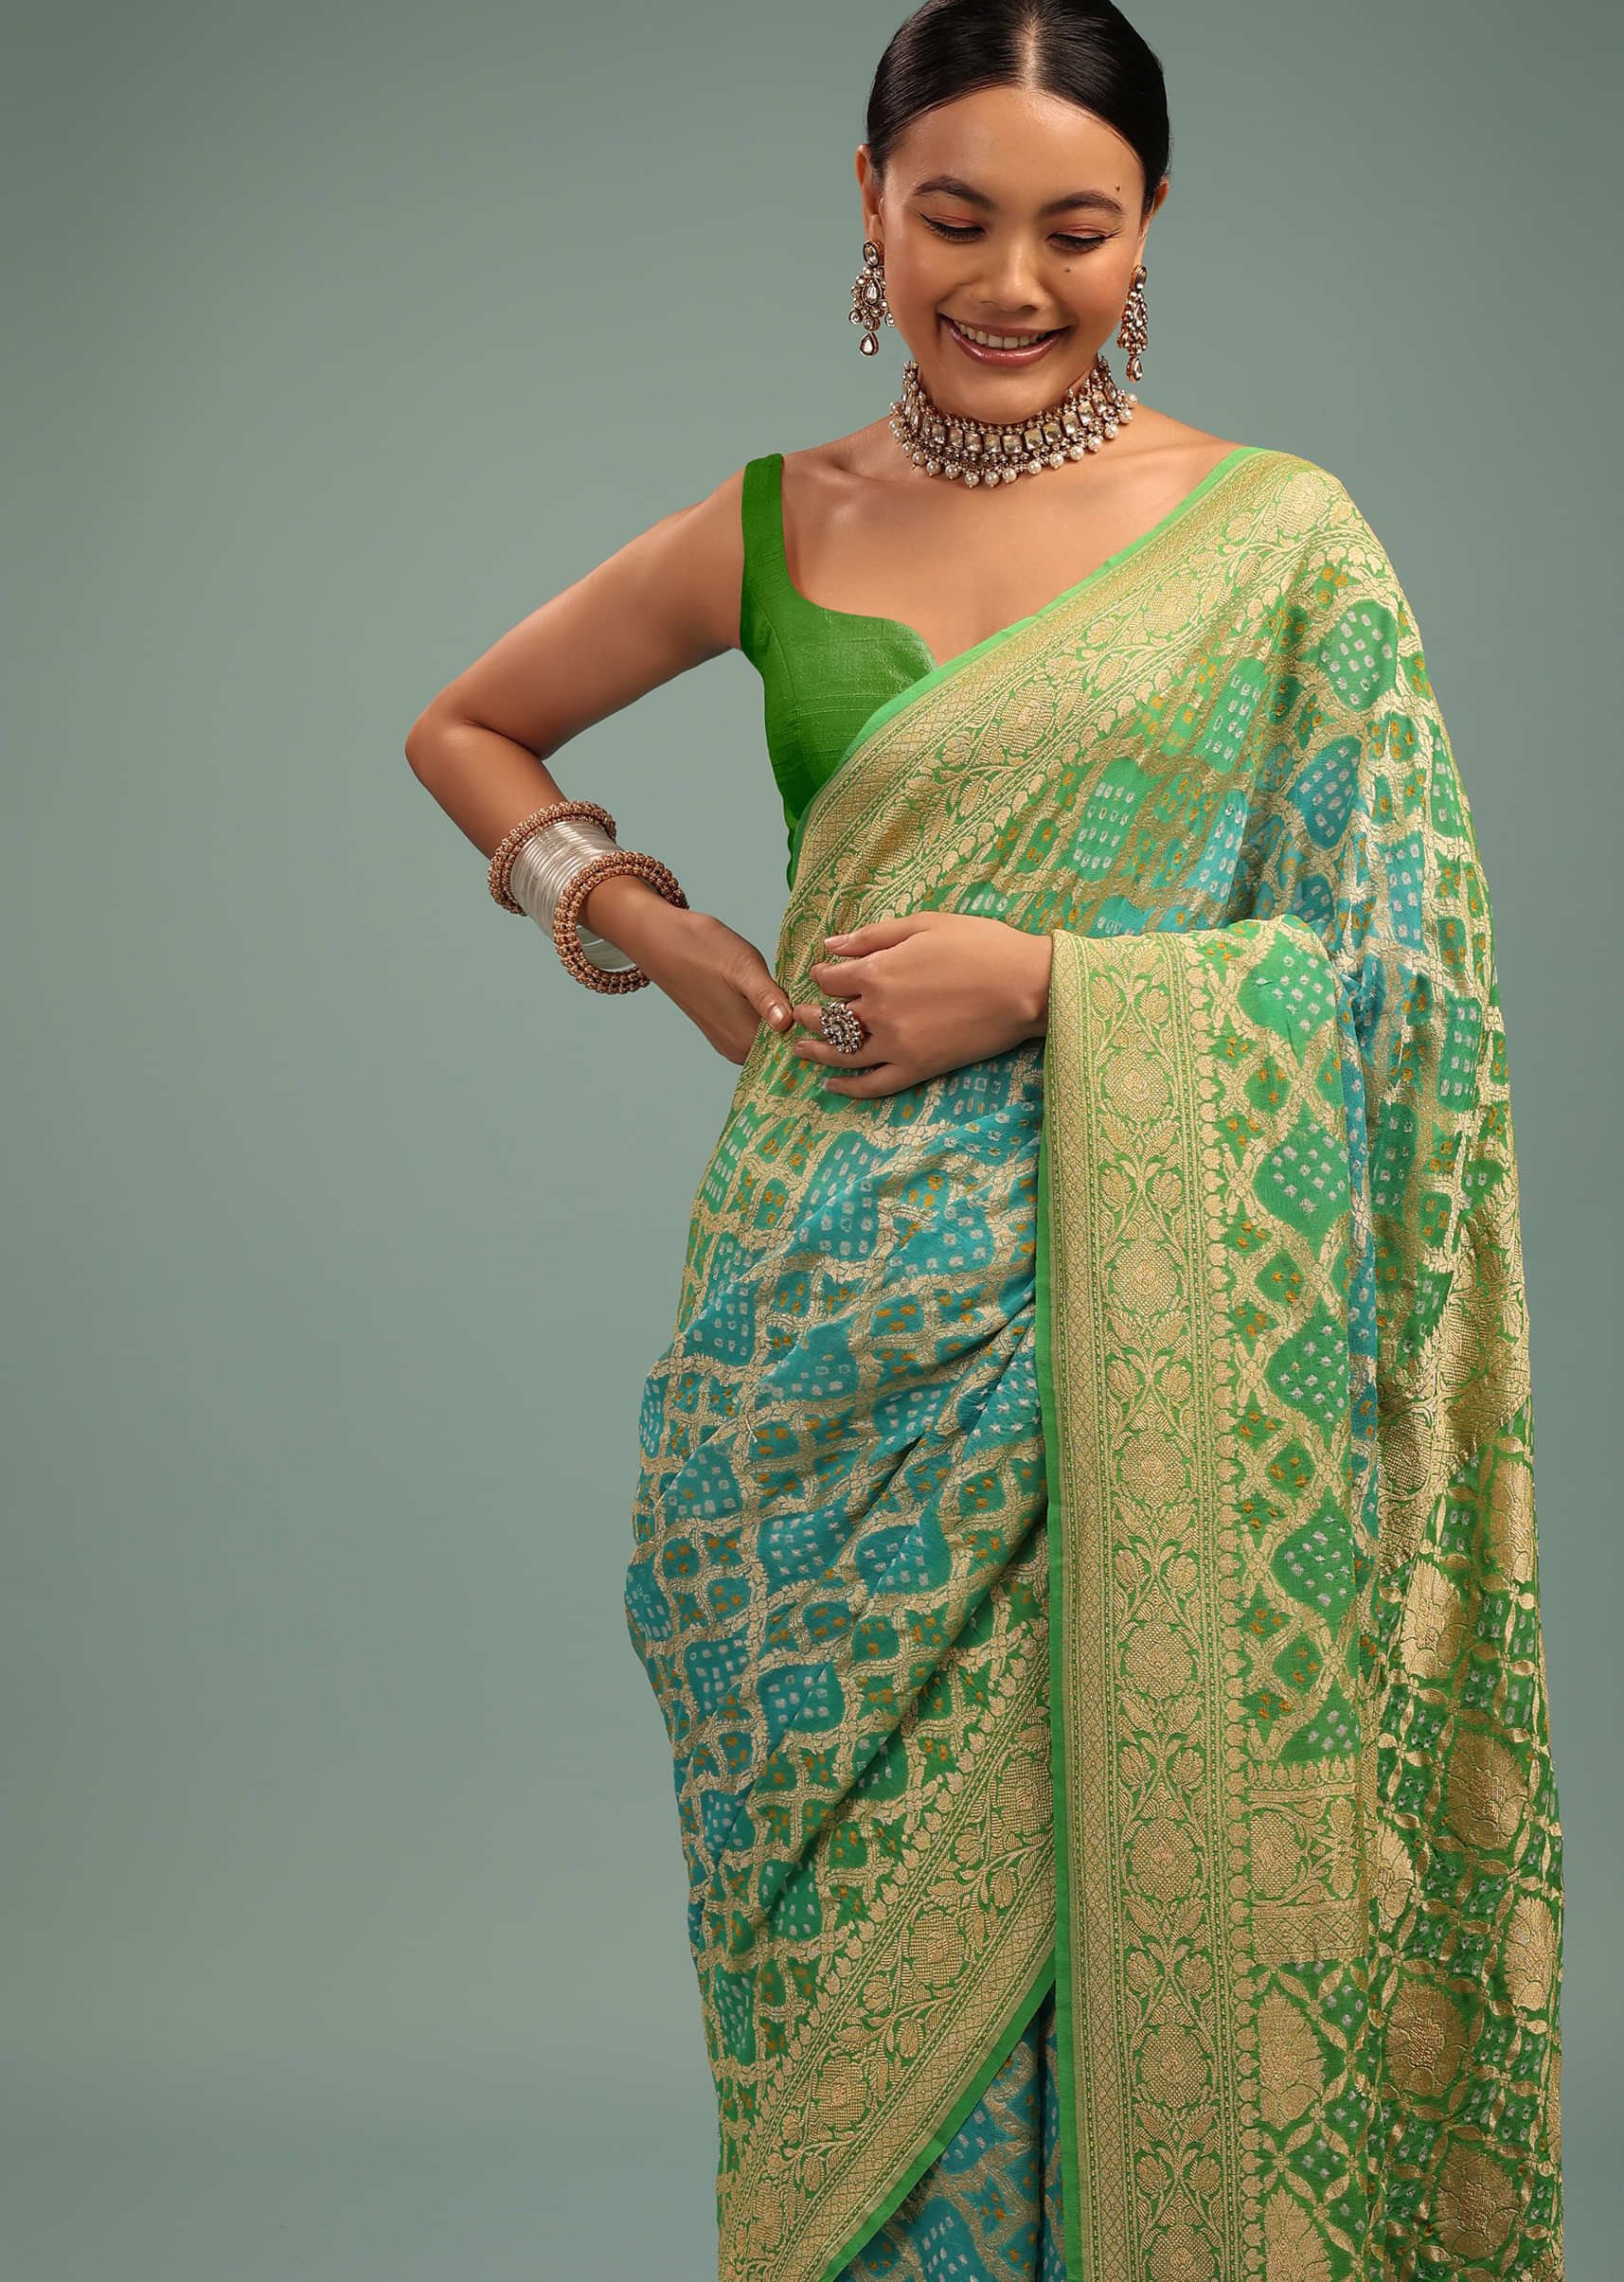 Dual-Tone Sea Green And River Blue Saree In Bandhani Handwoven Georgette With Floral Jaal Weave